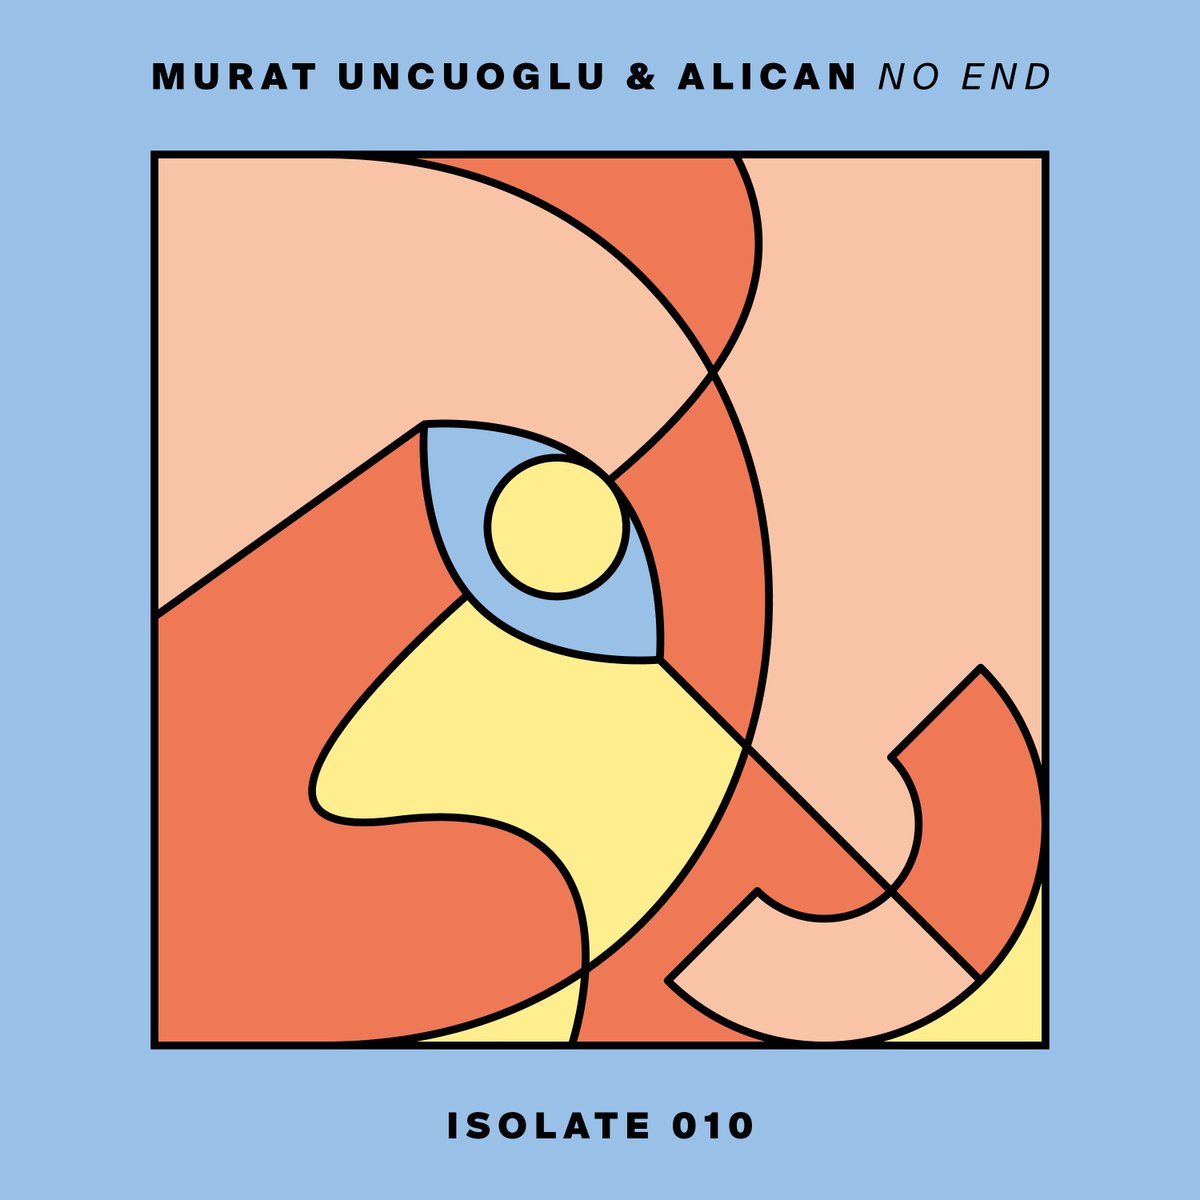 LISTEN! To the title track from @muratuncuoglu & @alicany_ ‘No End’ EP on @isolateistanbul soundcloud.com/sweetmusicofc/… BIG thanks to Sweet Music for the support. BUY - isolate-music.bandcamp.com